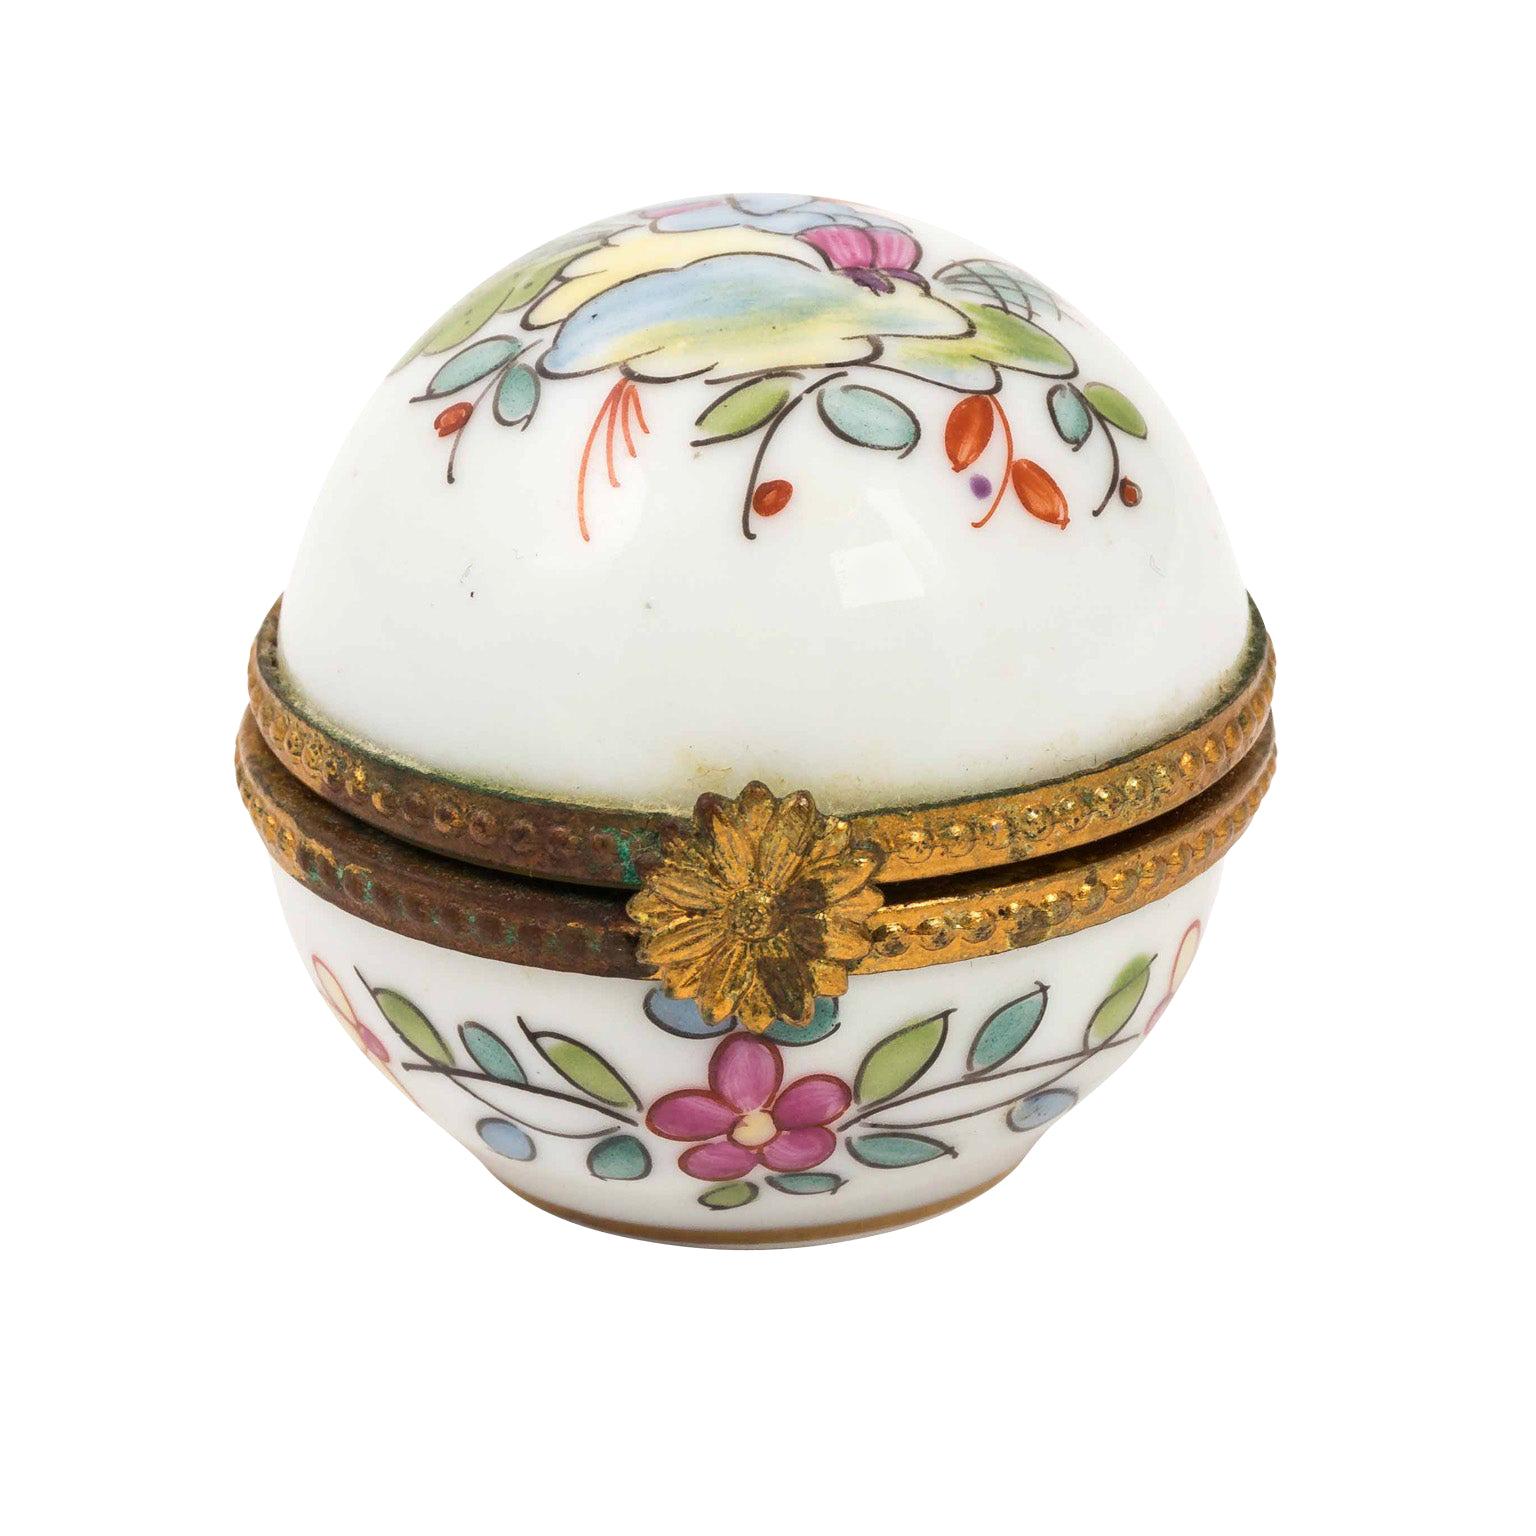 Tiffany & Co. Limoges Hand Painted Porcelain Box